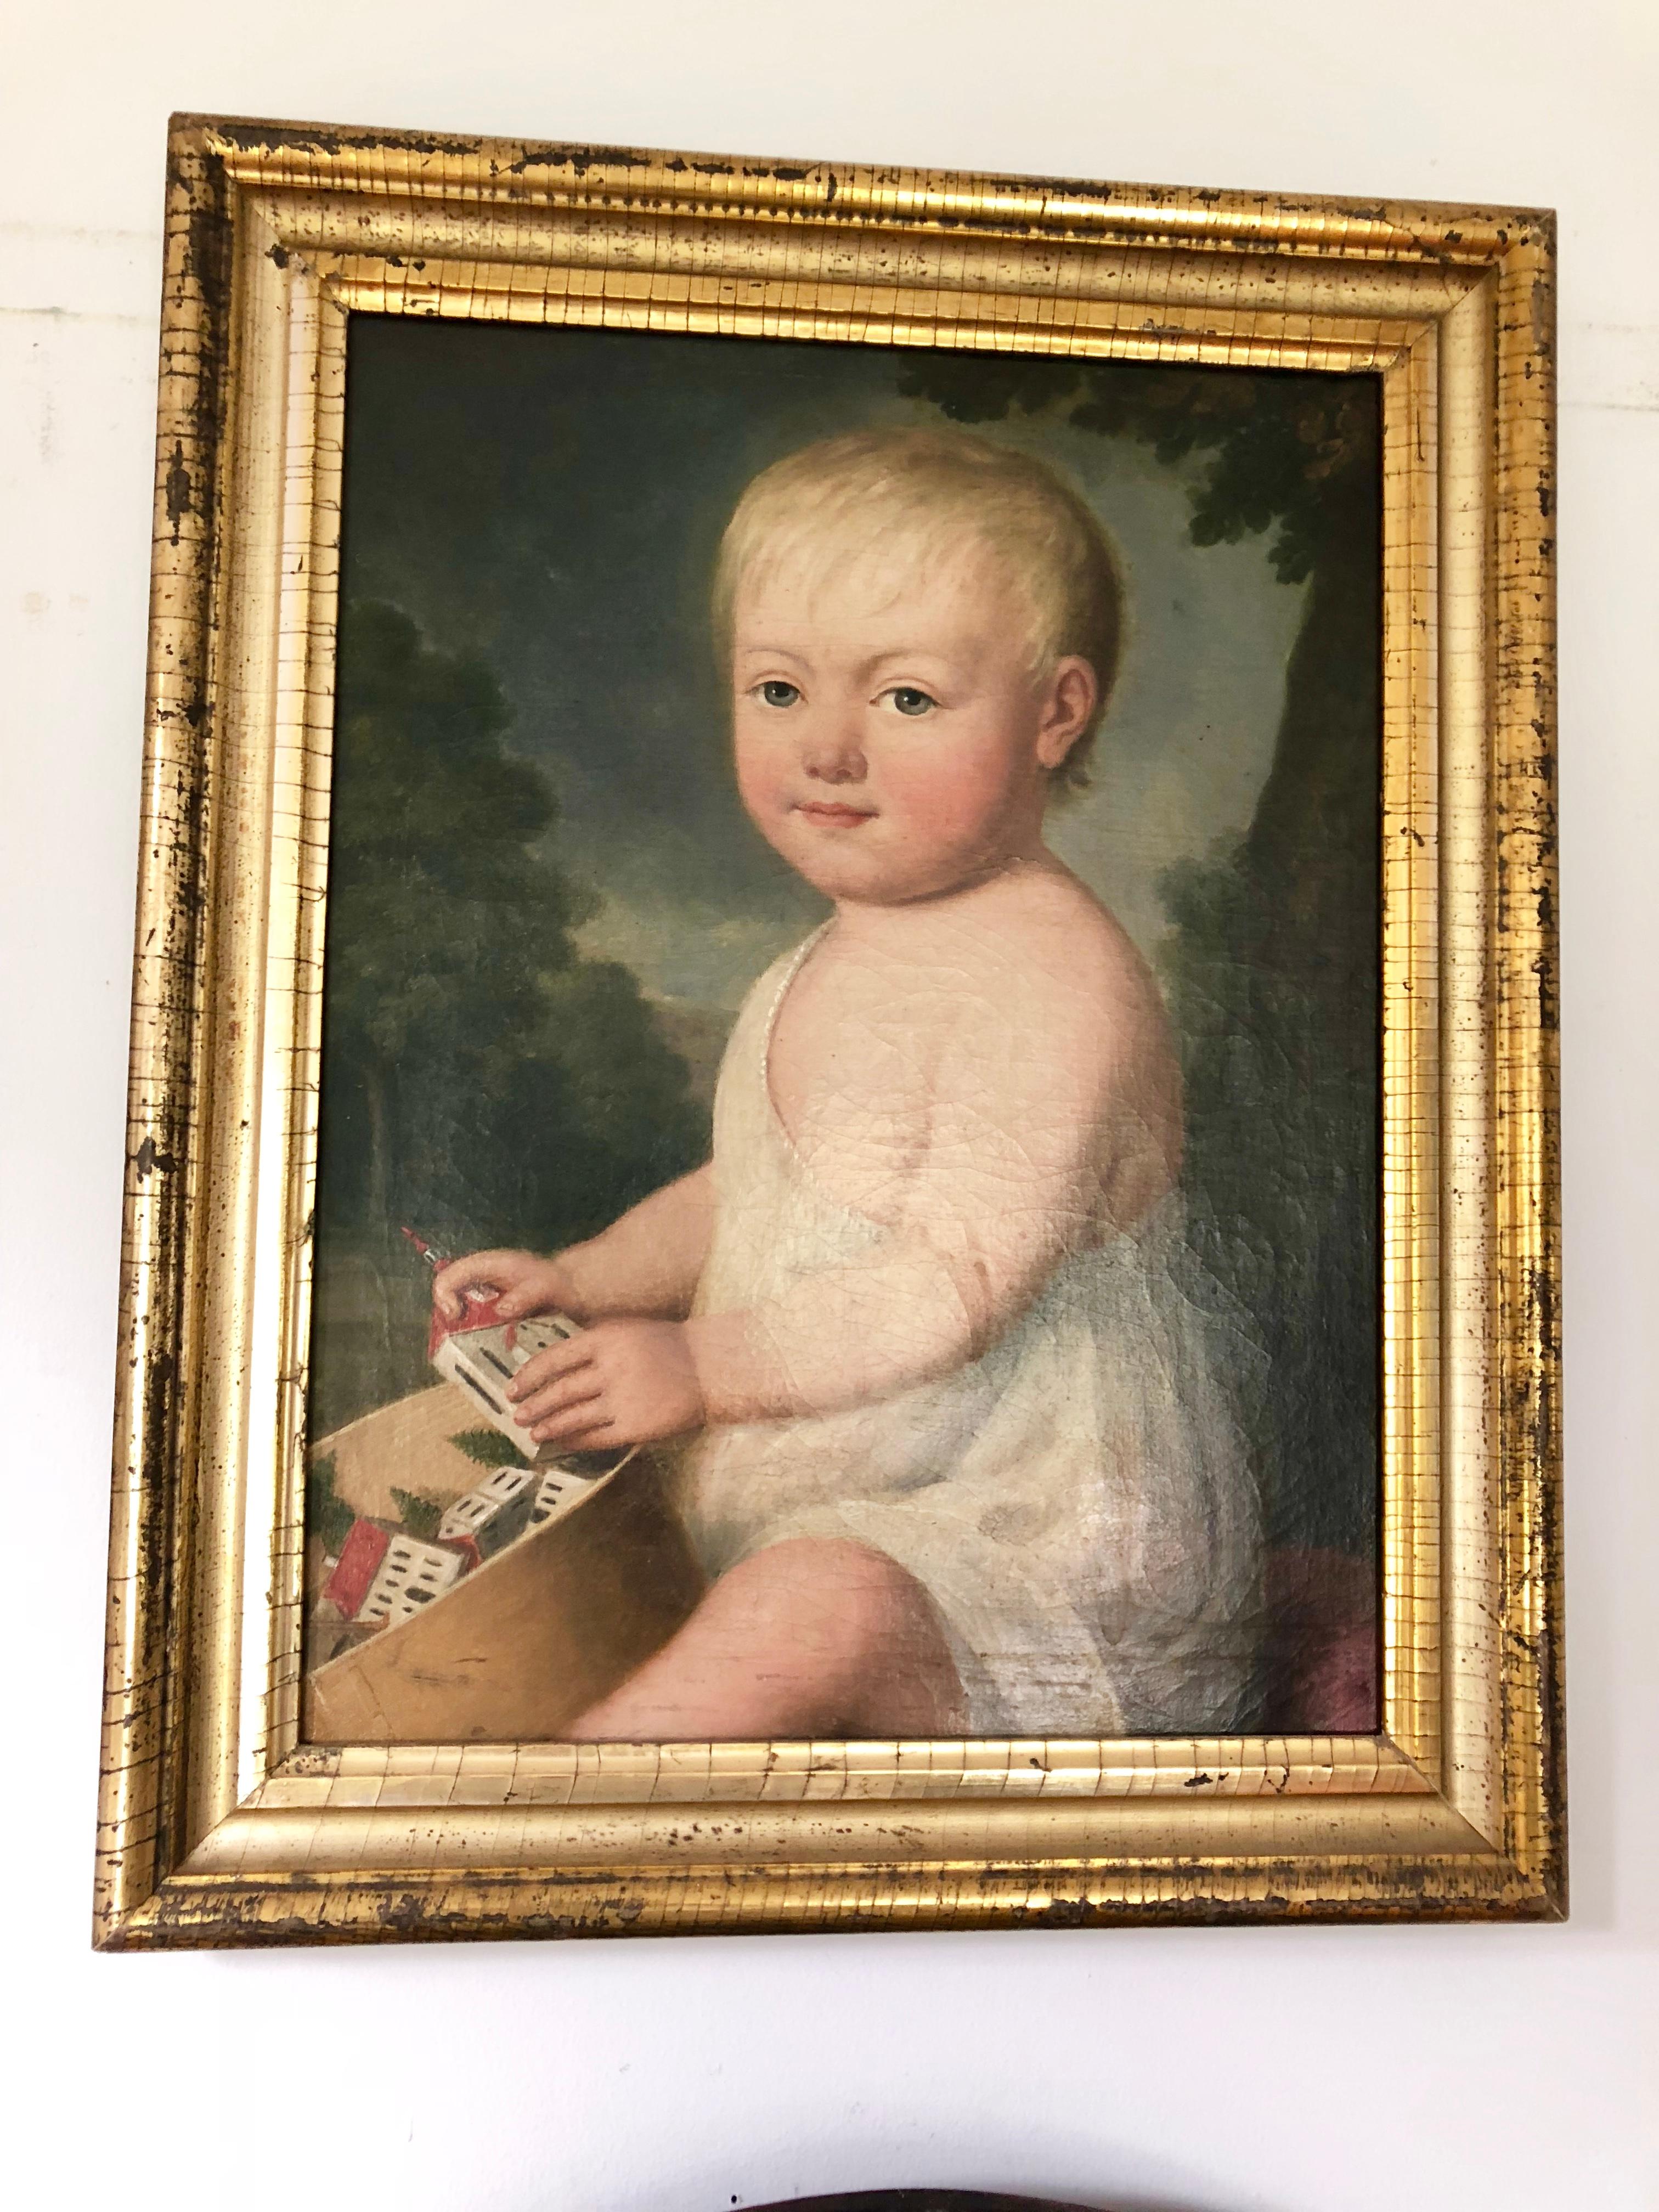 A charming oil-on-canves portrait of a young child seated with a wood band-box filled with his toys, American, early 19th century, in its original giltwood frame.